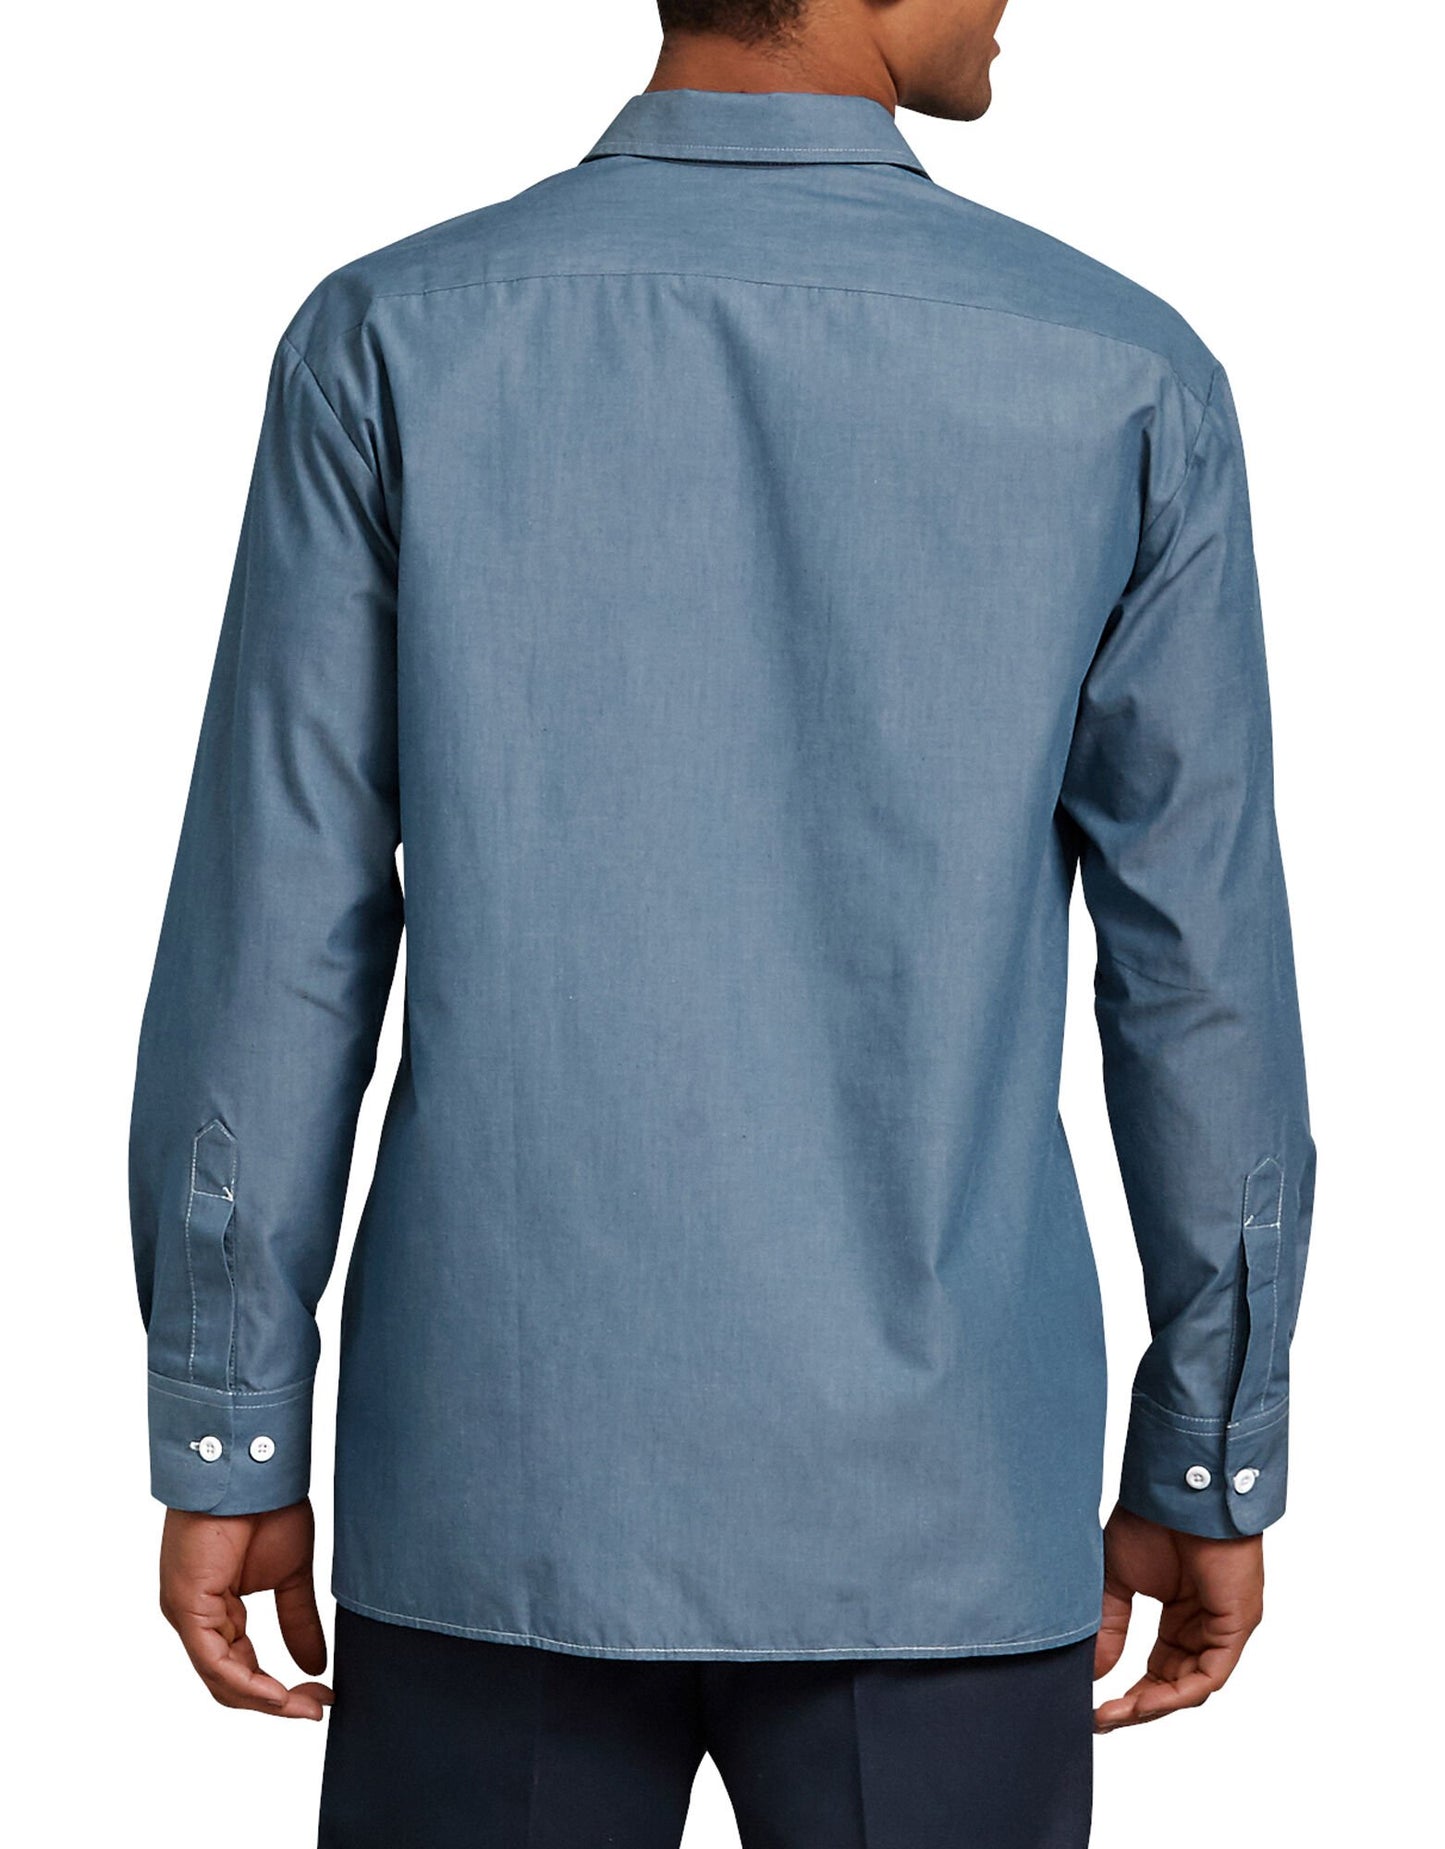 Relaxed Fit Long Sleeve Chambray Shirt, Blue